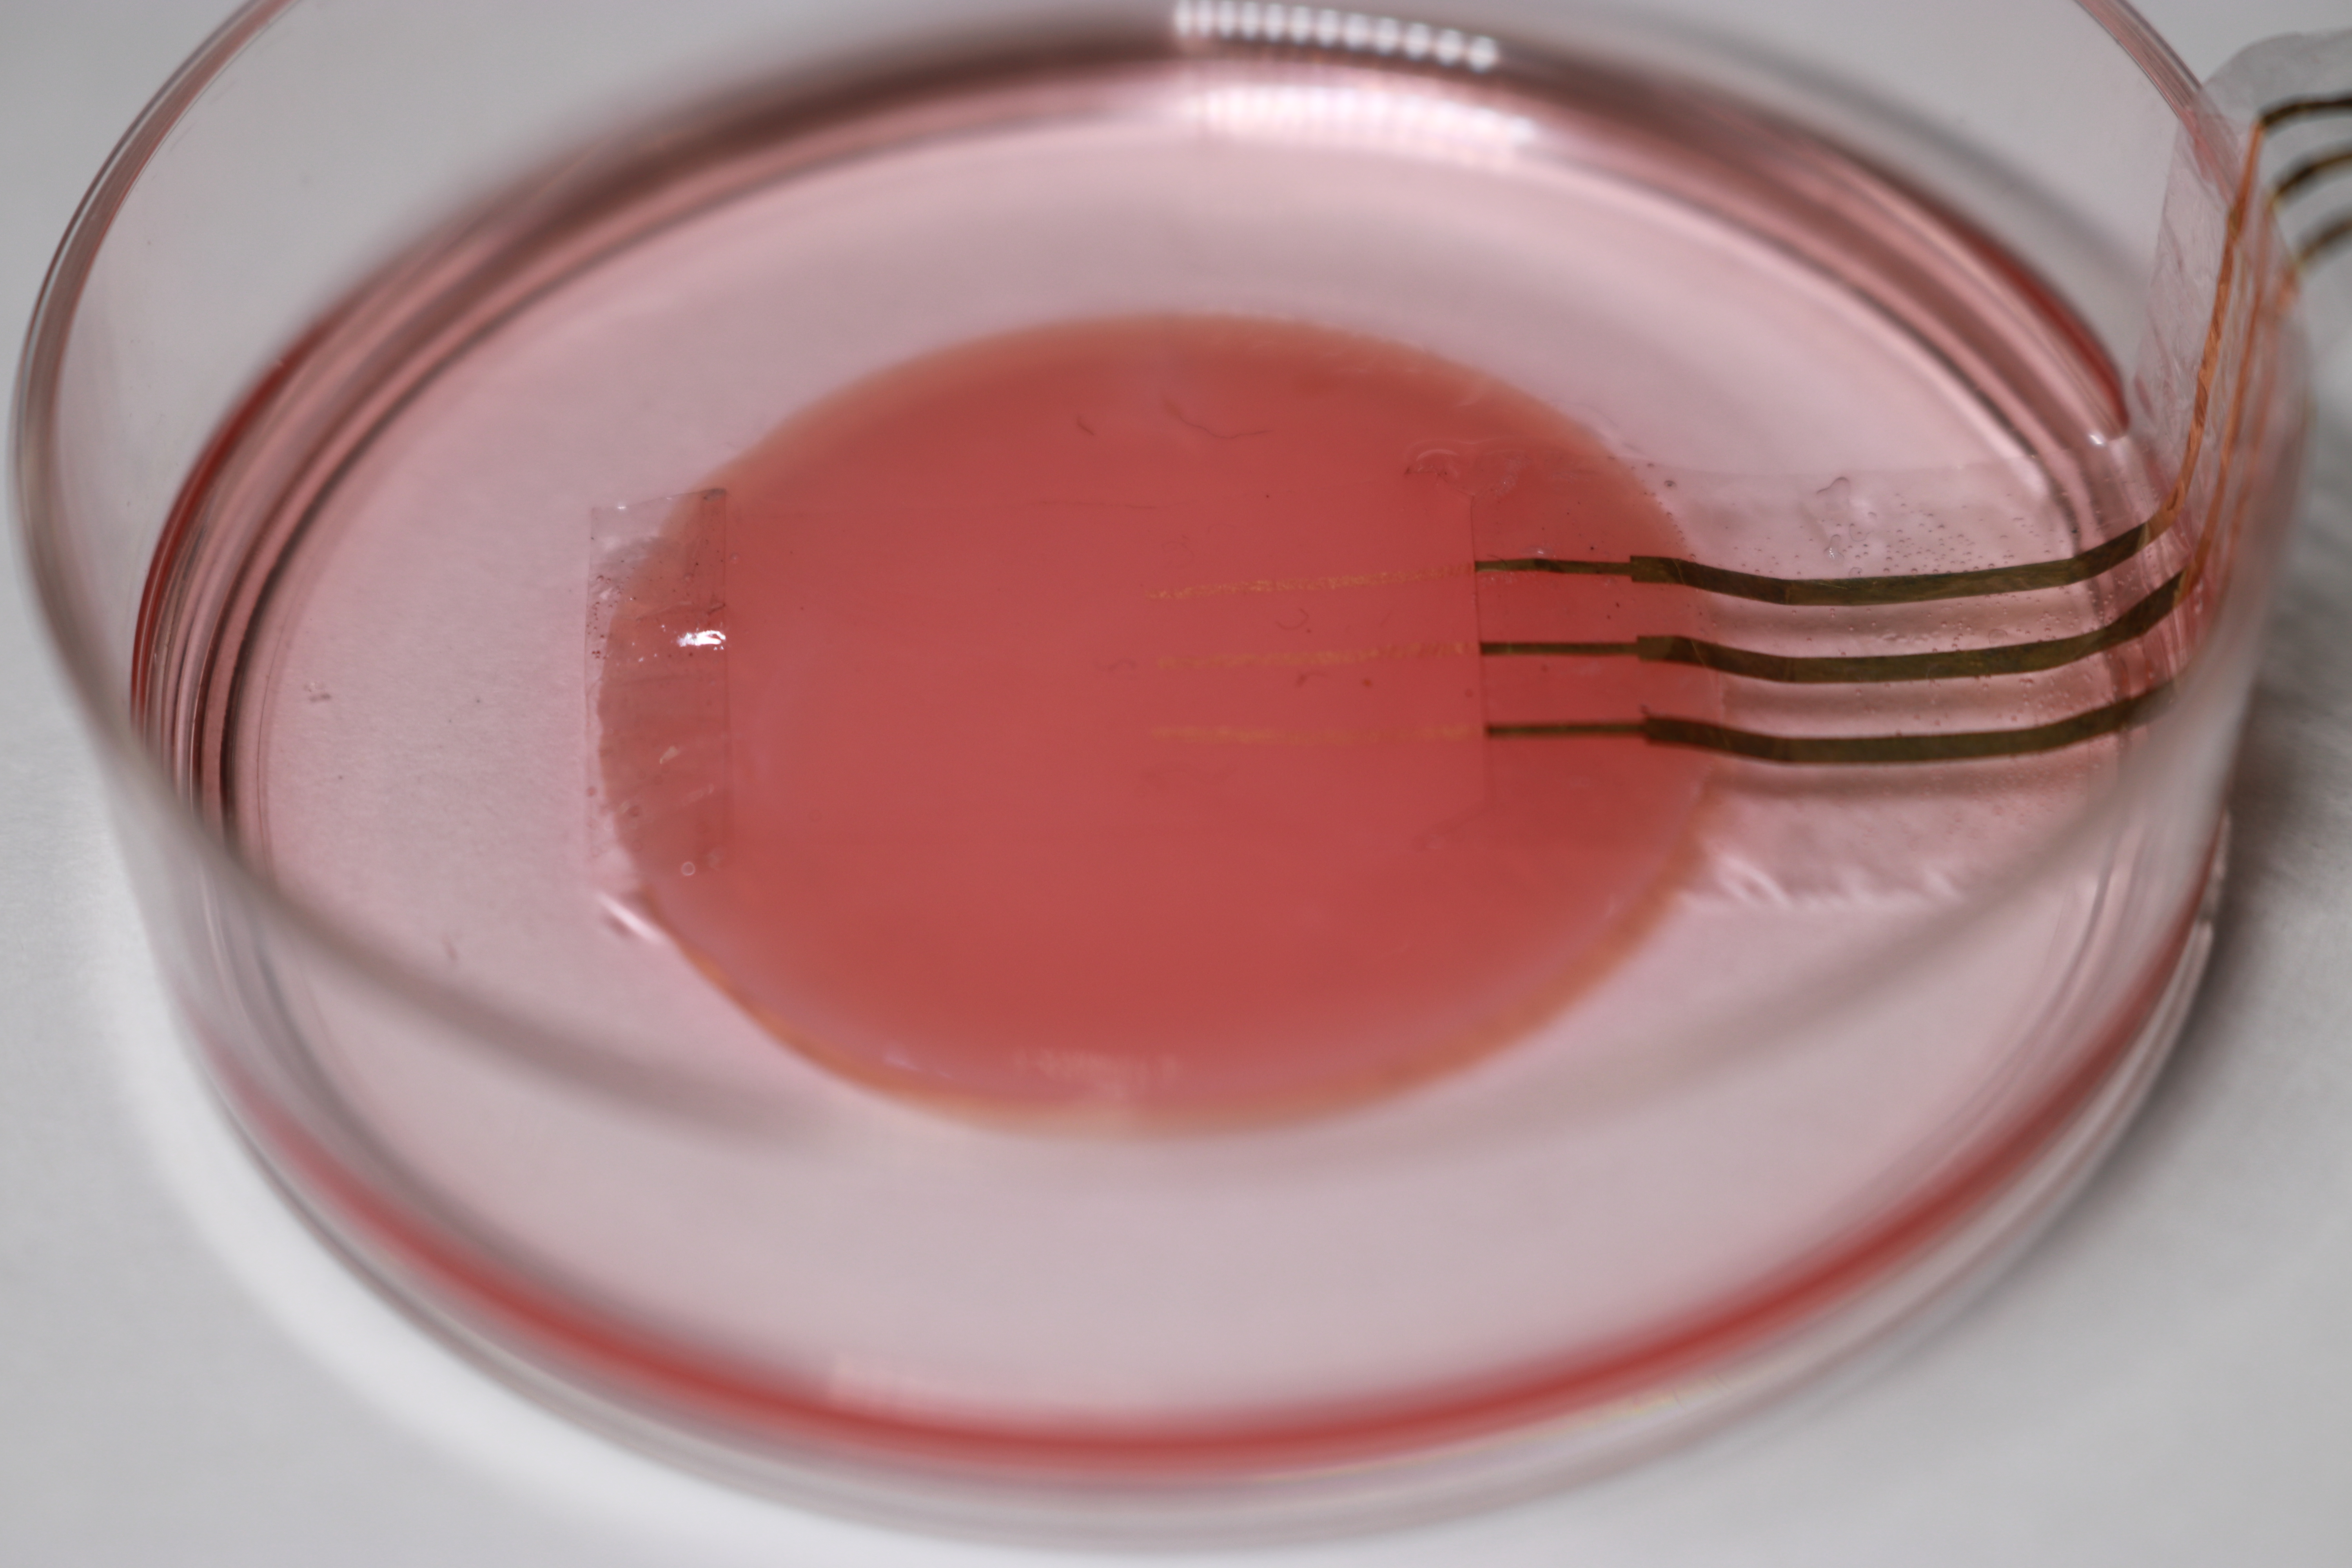 A pink substance in a sample dish with thin gold shapes on it with wires attached.